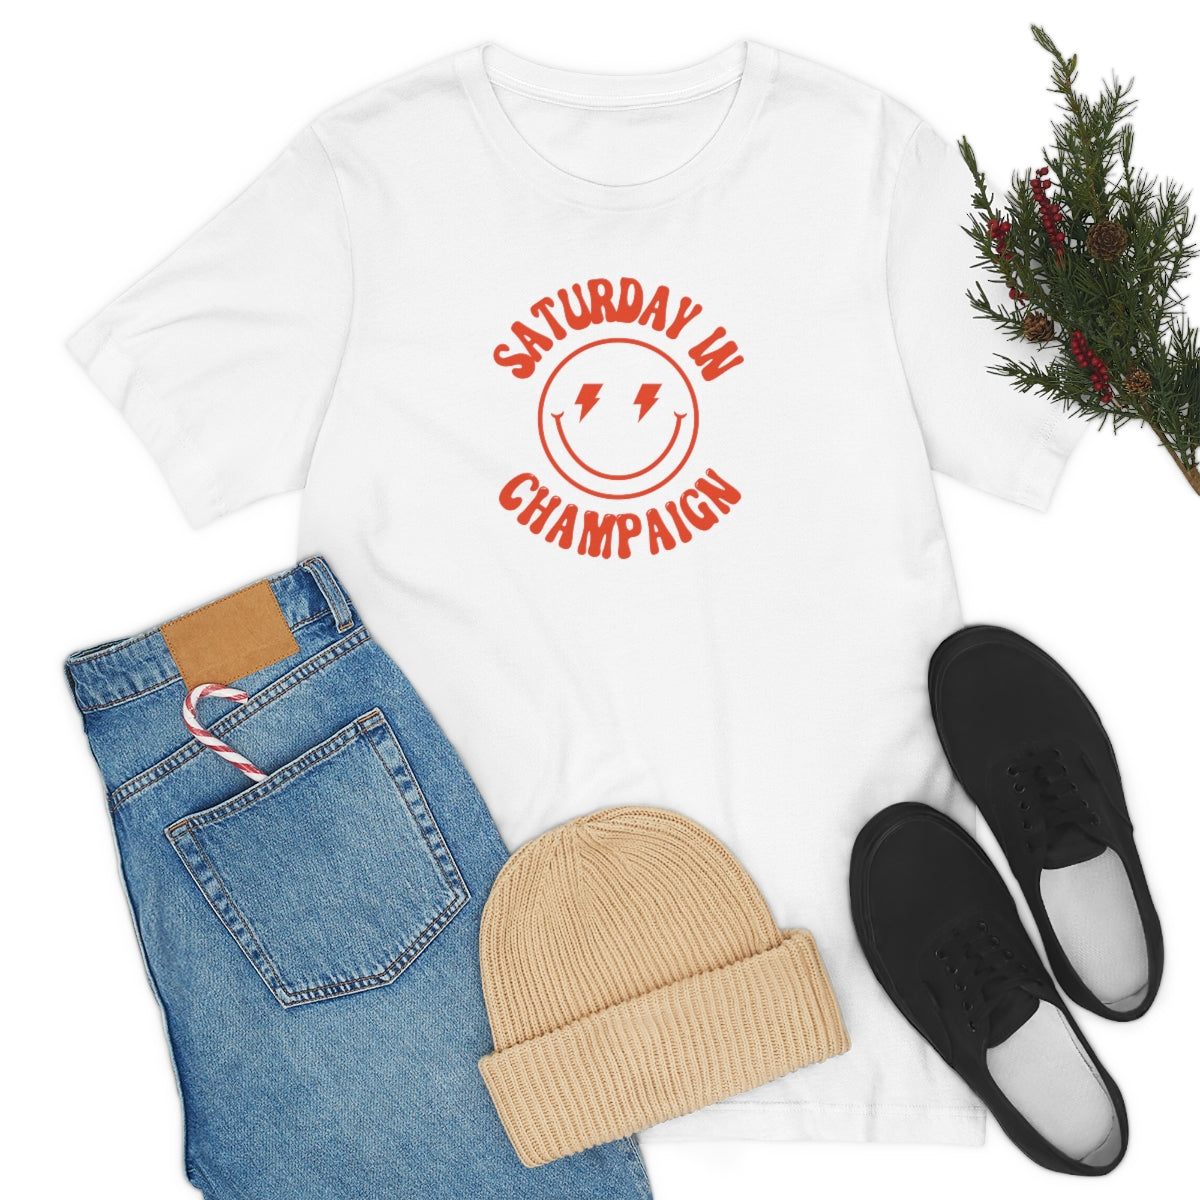 Smiley Champaign Short Sleeve Tee - GG